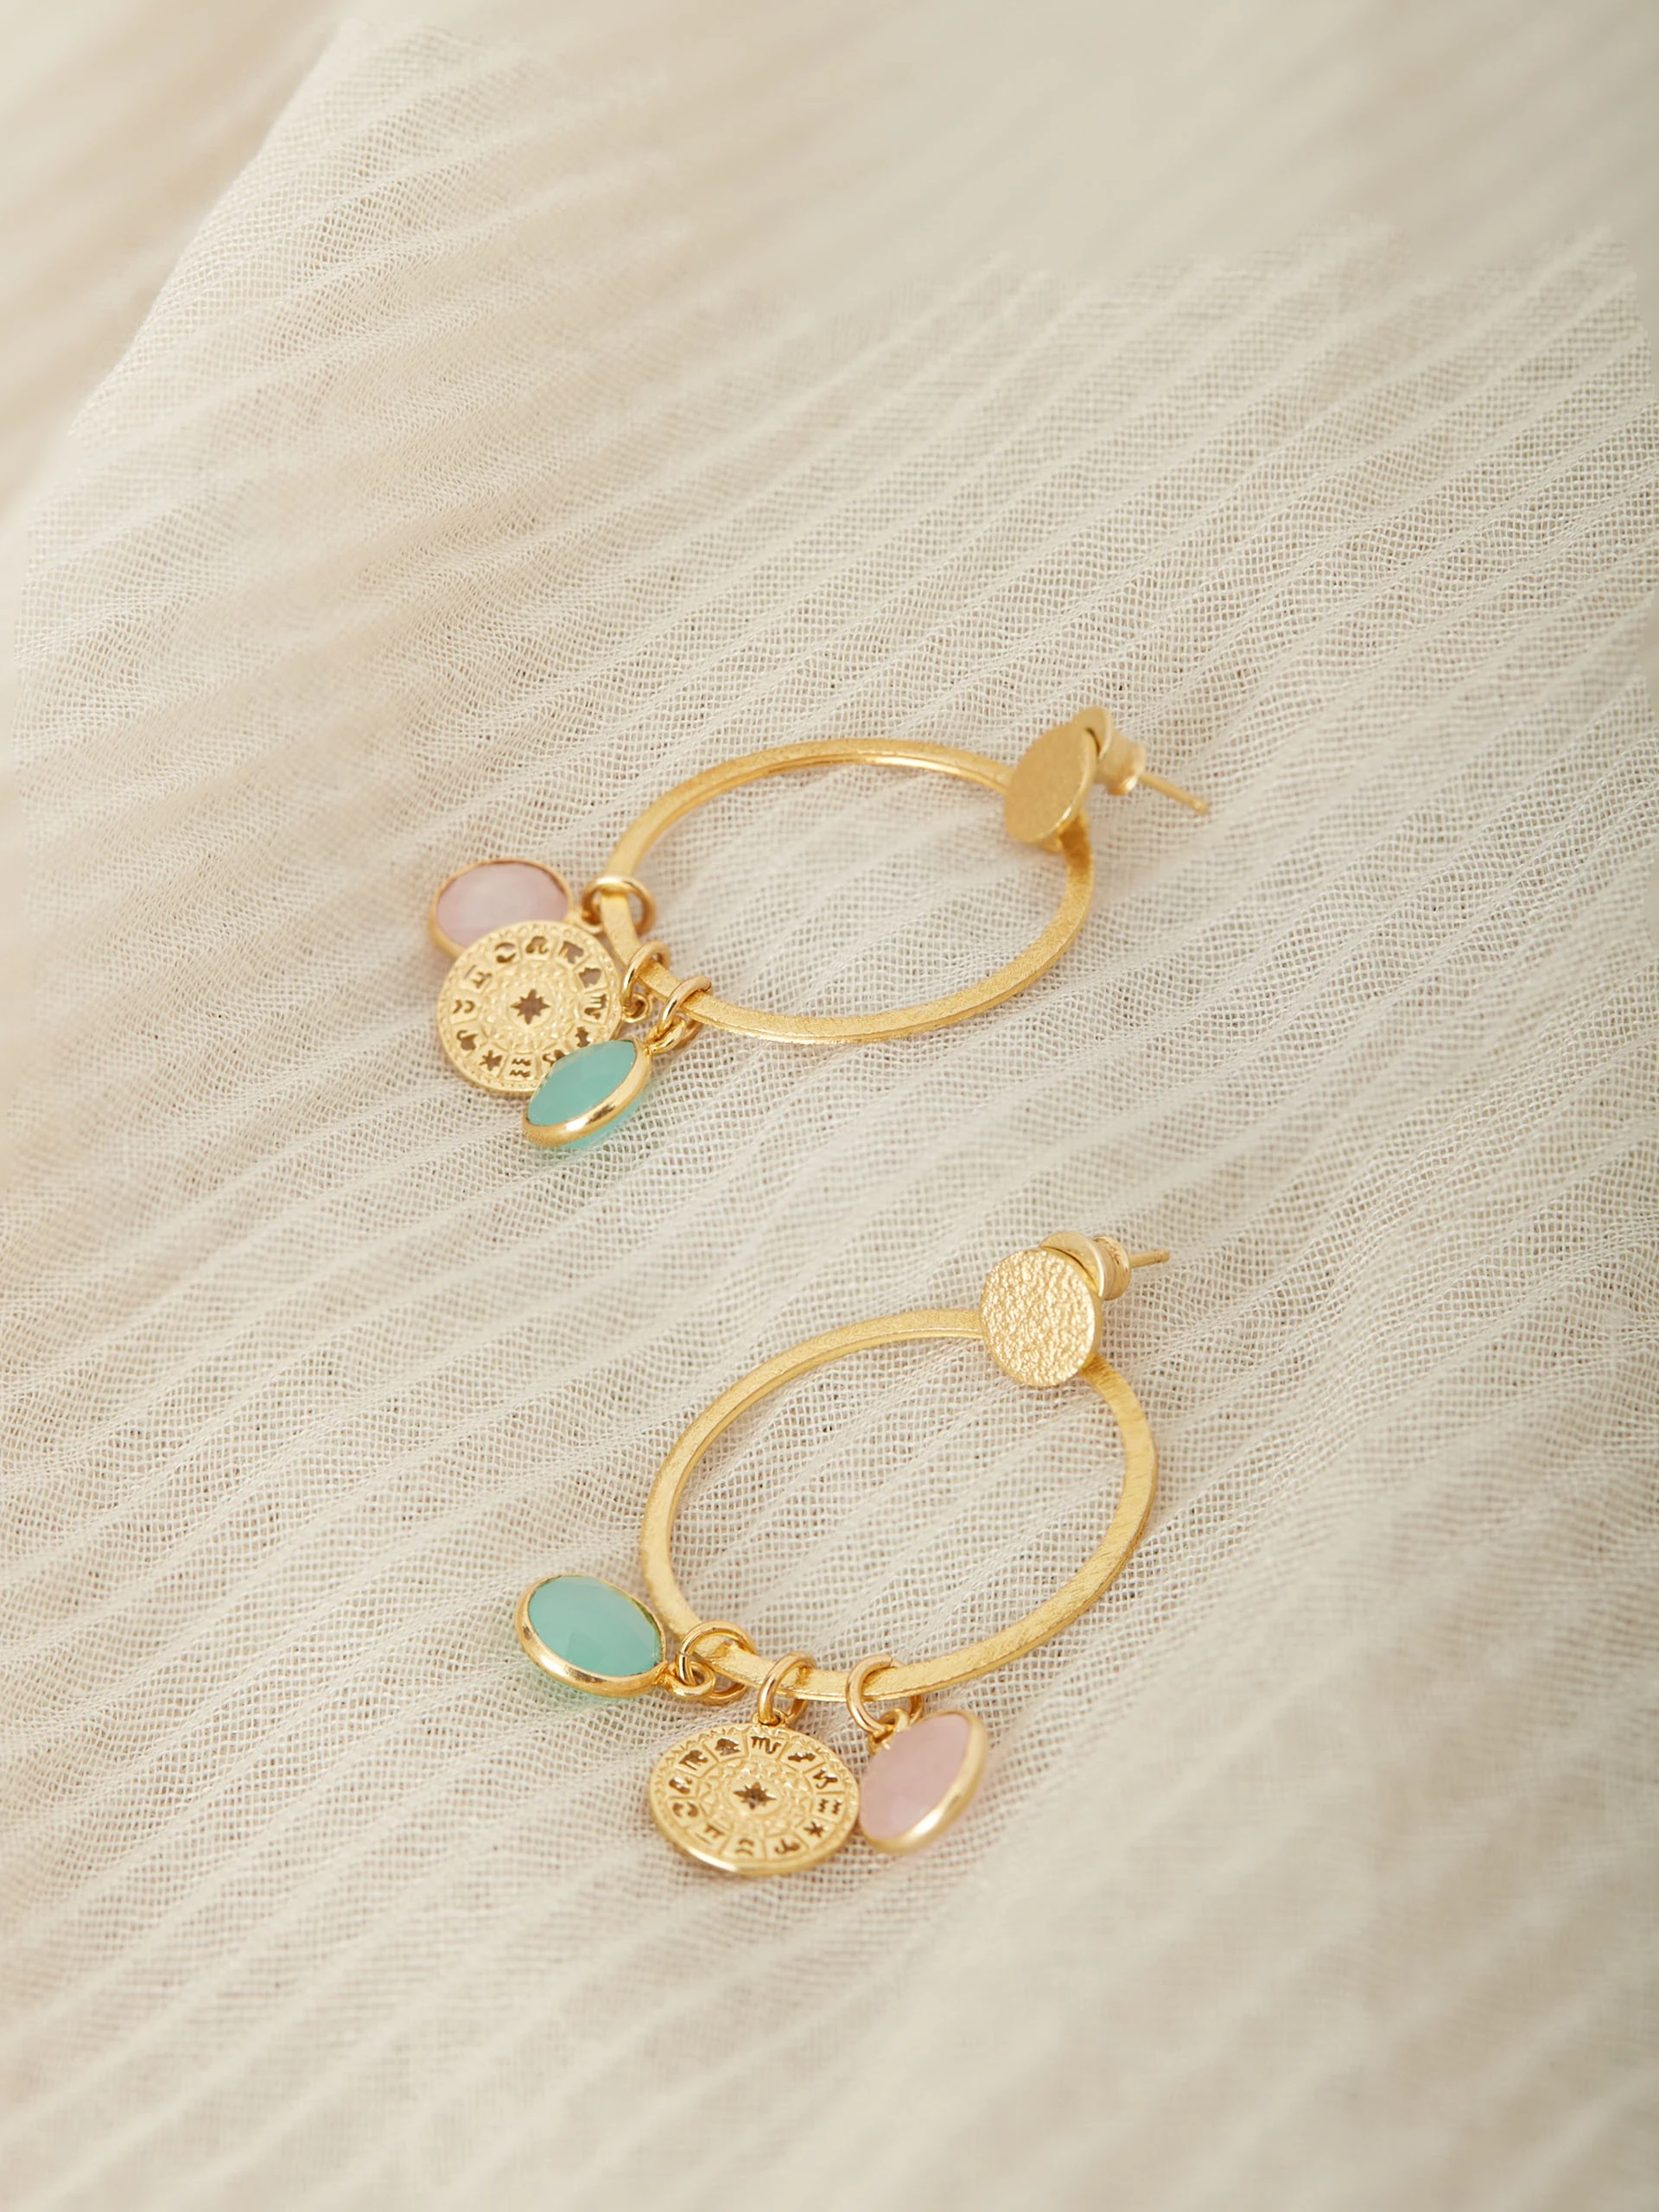 HOOP EARRINGS WITH STONE CHARMS